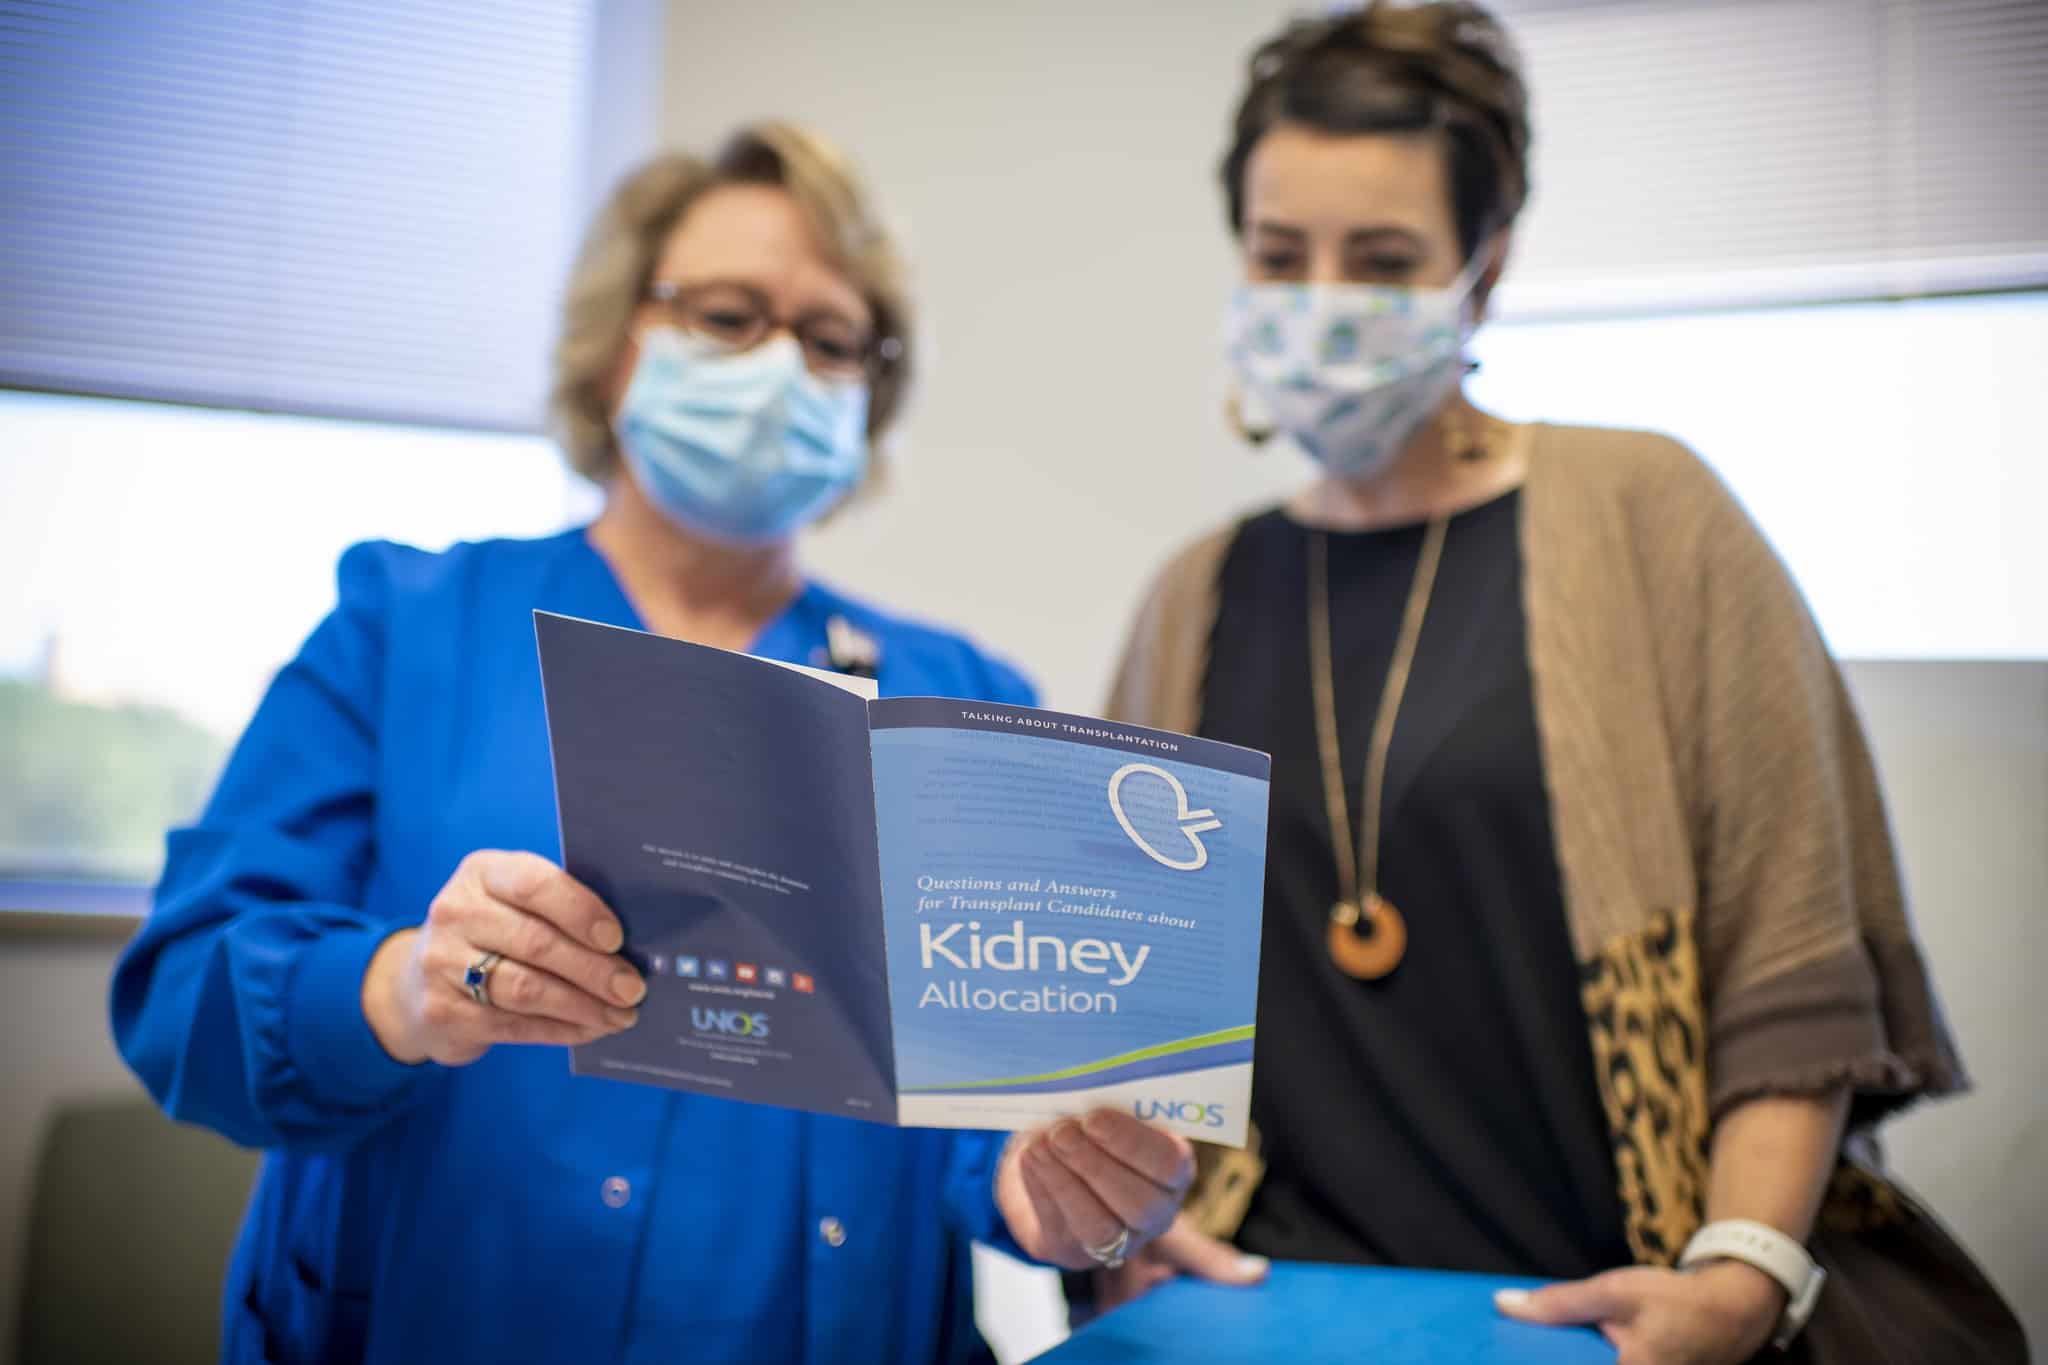 The UAMS kidney transplant program received the highest ranking possible from the Scientific Registry of Transplant Recipients in both the speed of obtaining donor kidneys and patient survivability one year after transplant.